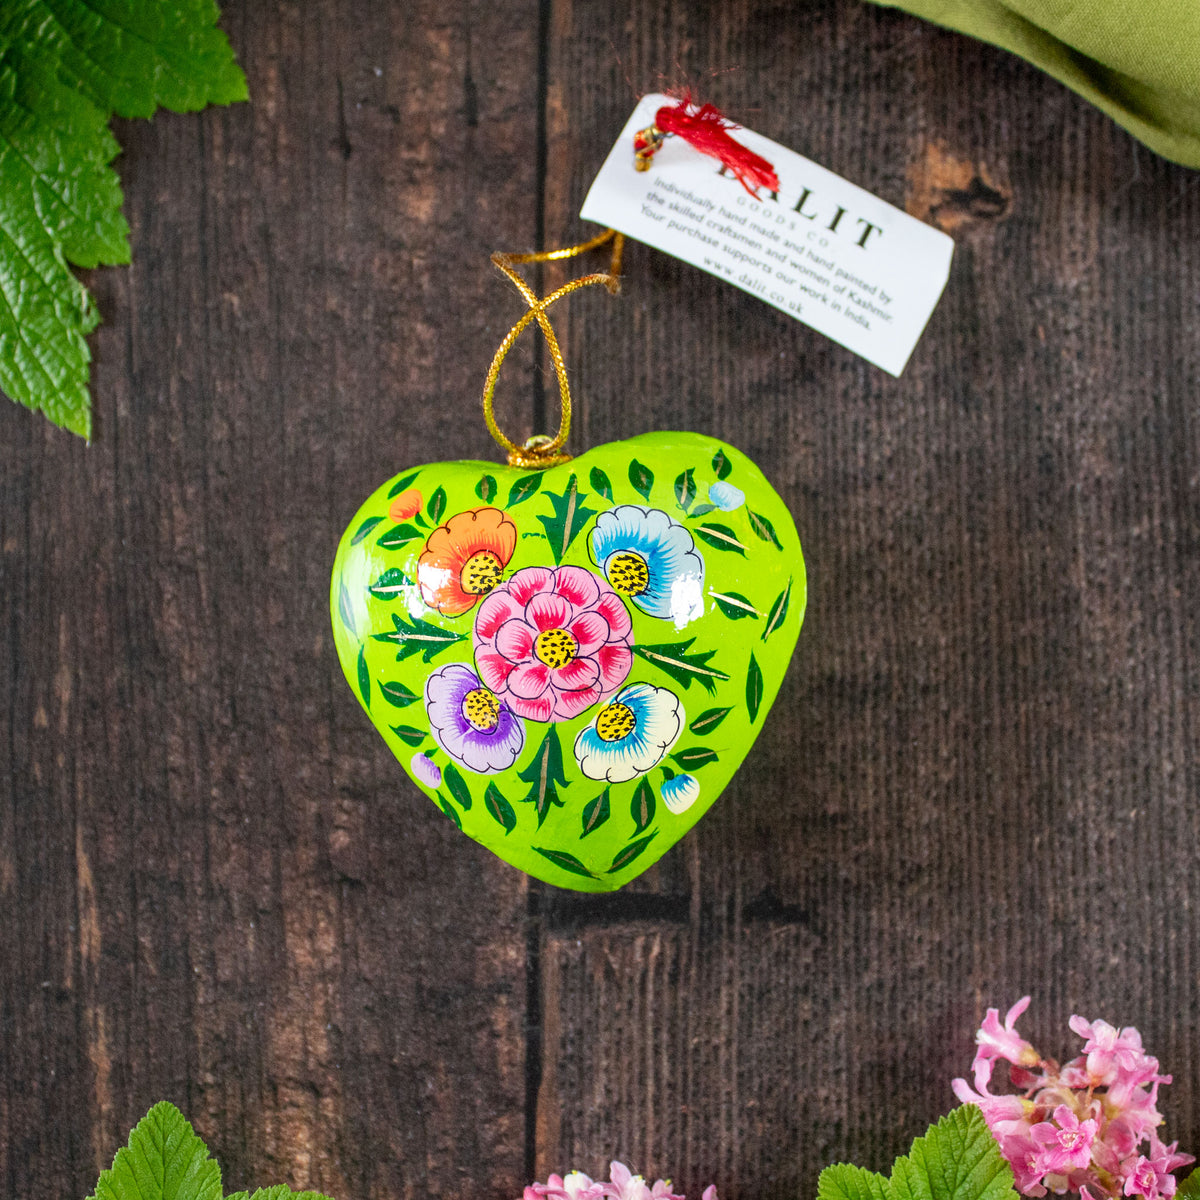 Hanging Spring Decoration - Painted Heart - Green Flowers